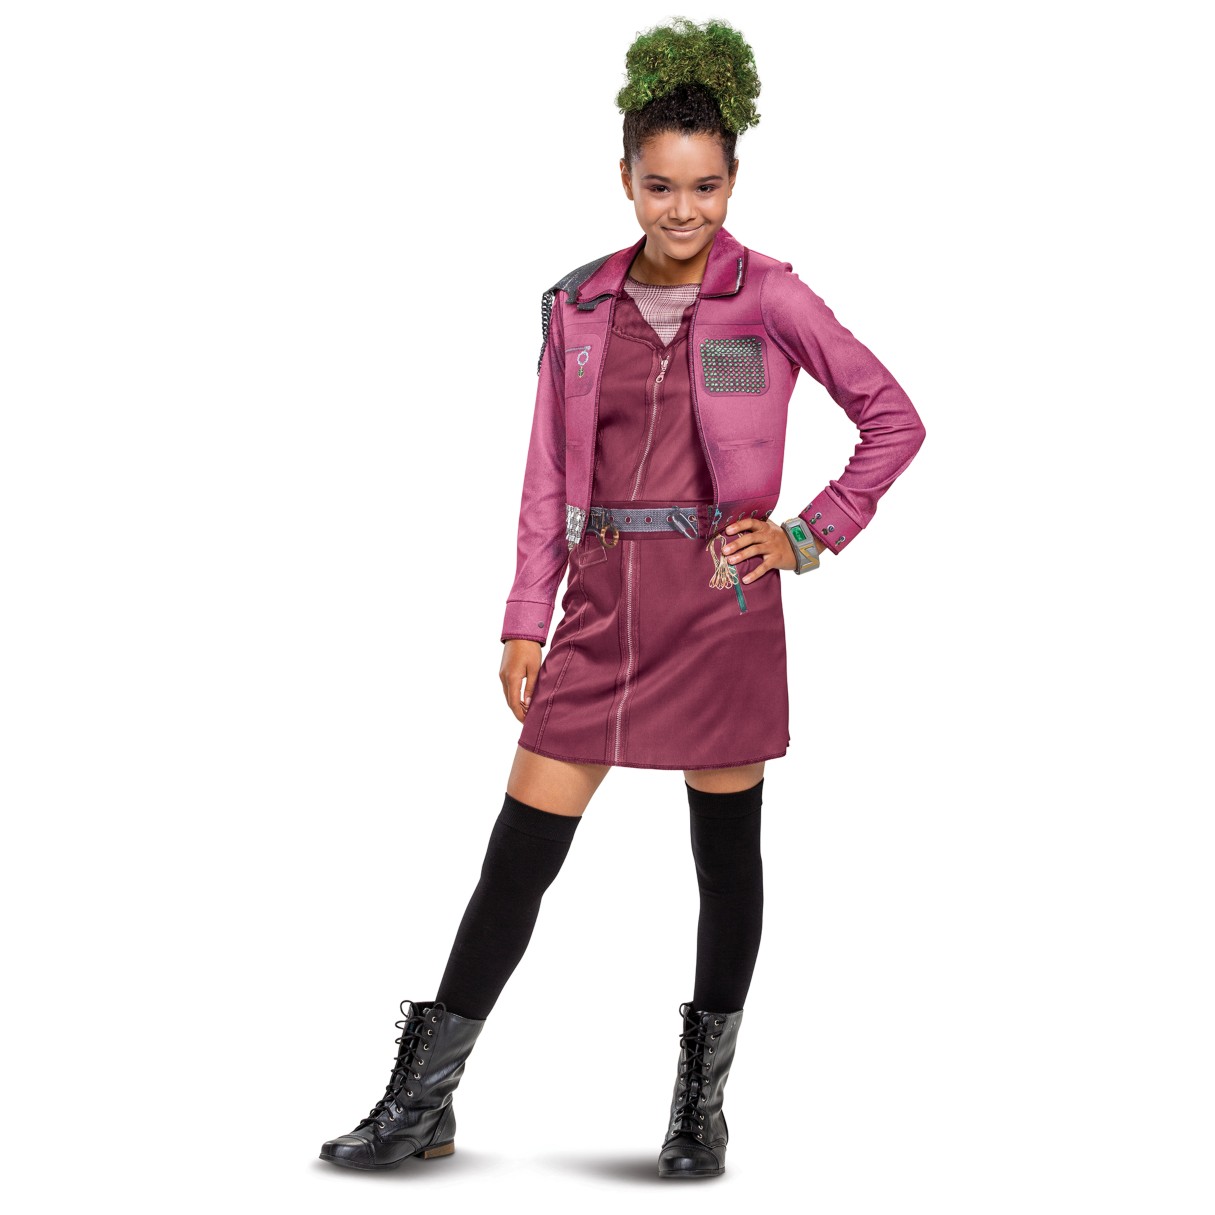 Eliza Costume for Kids by Disguise – Zombies 2